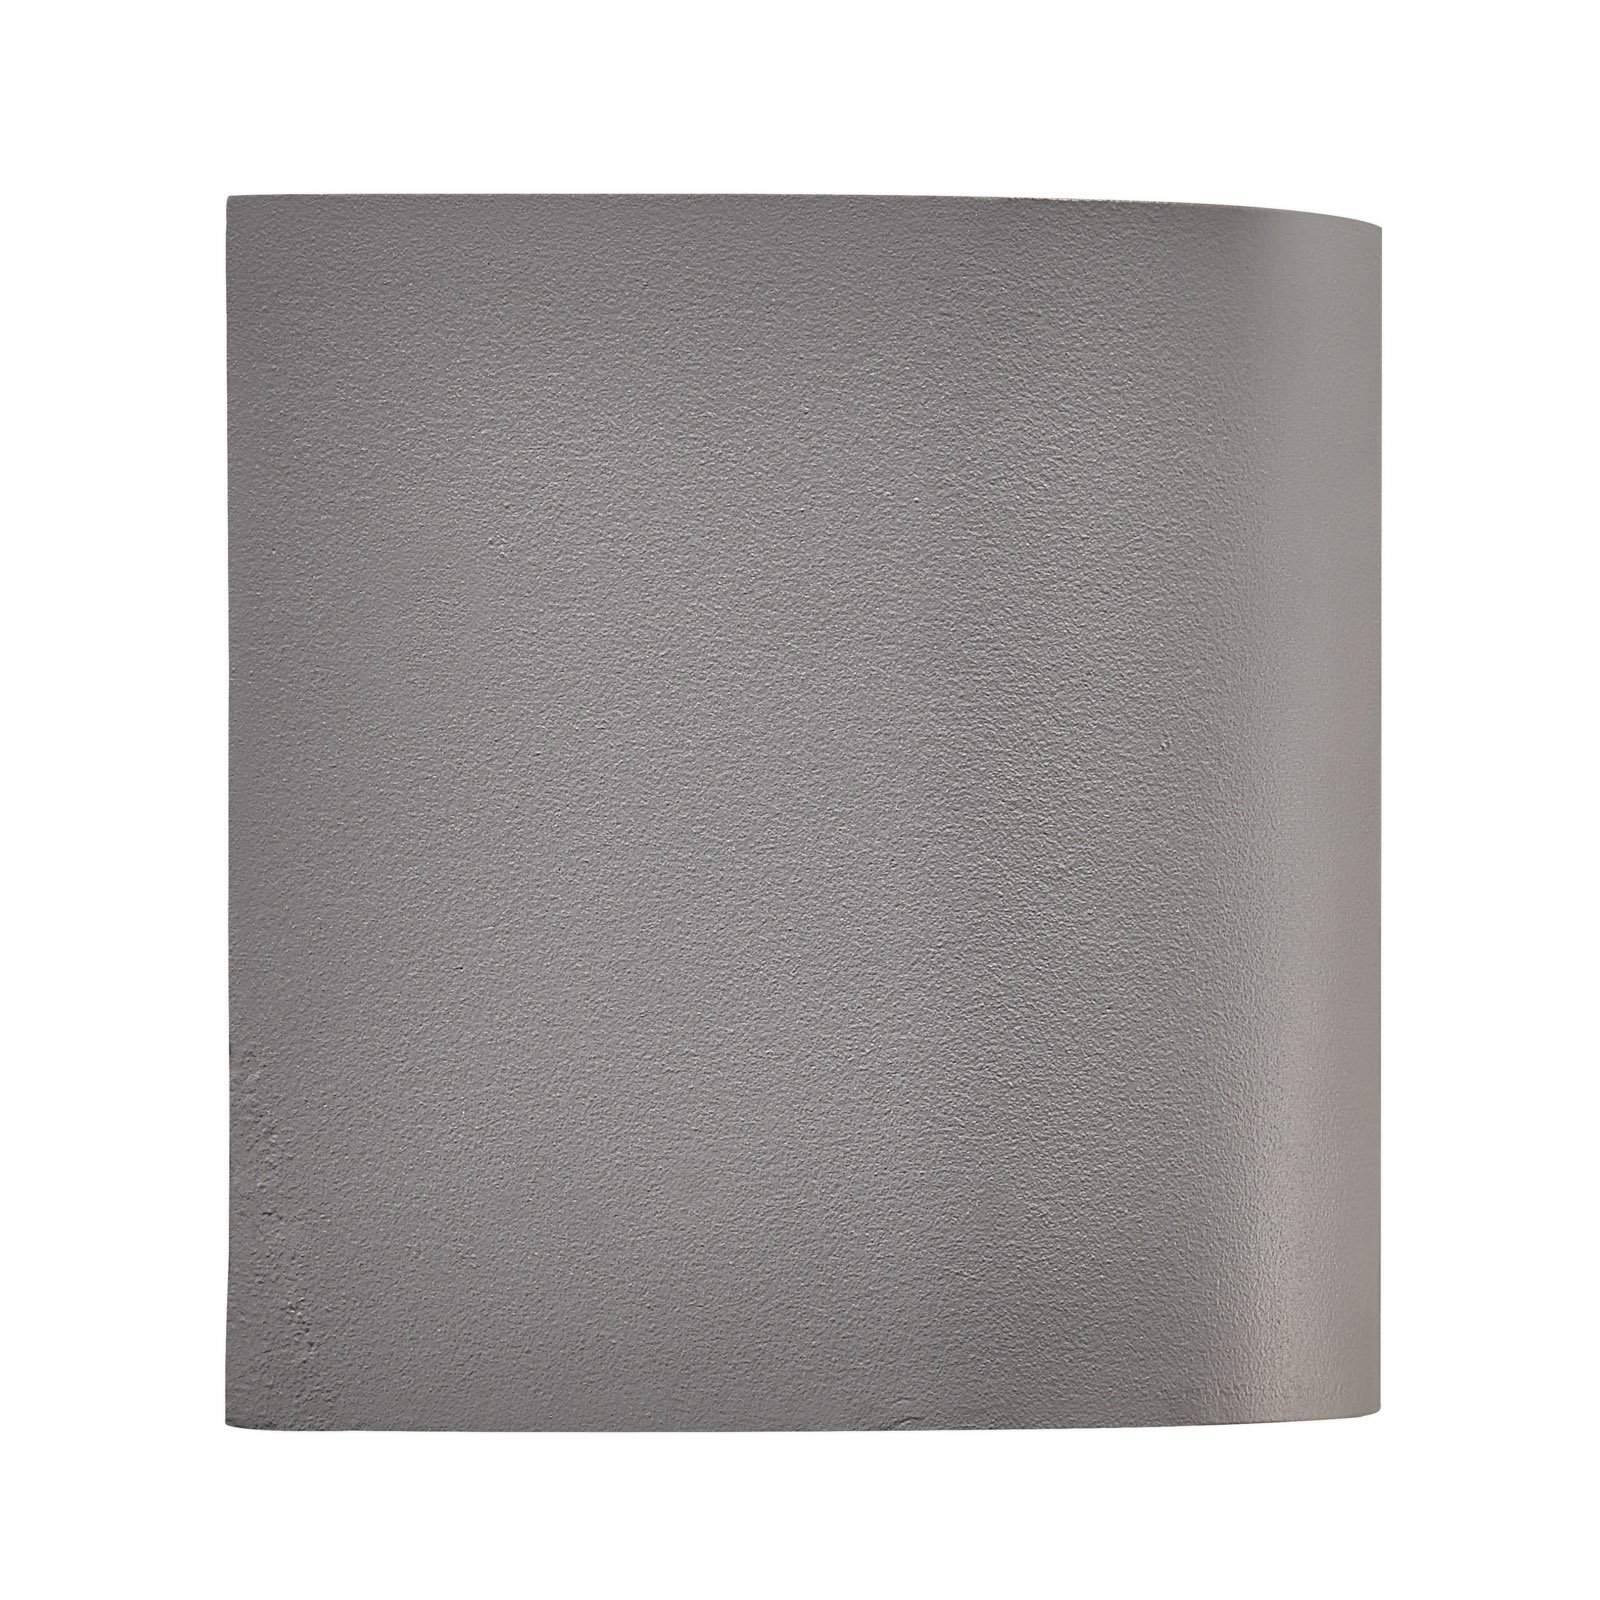 Canto 2 LED outdoor wall light, 10 cm, grey